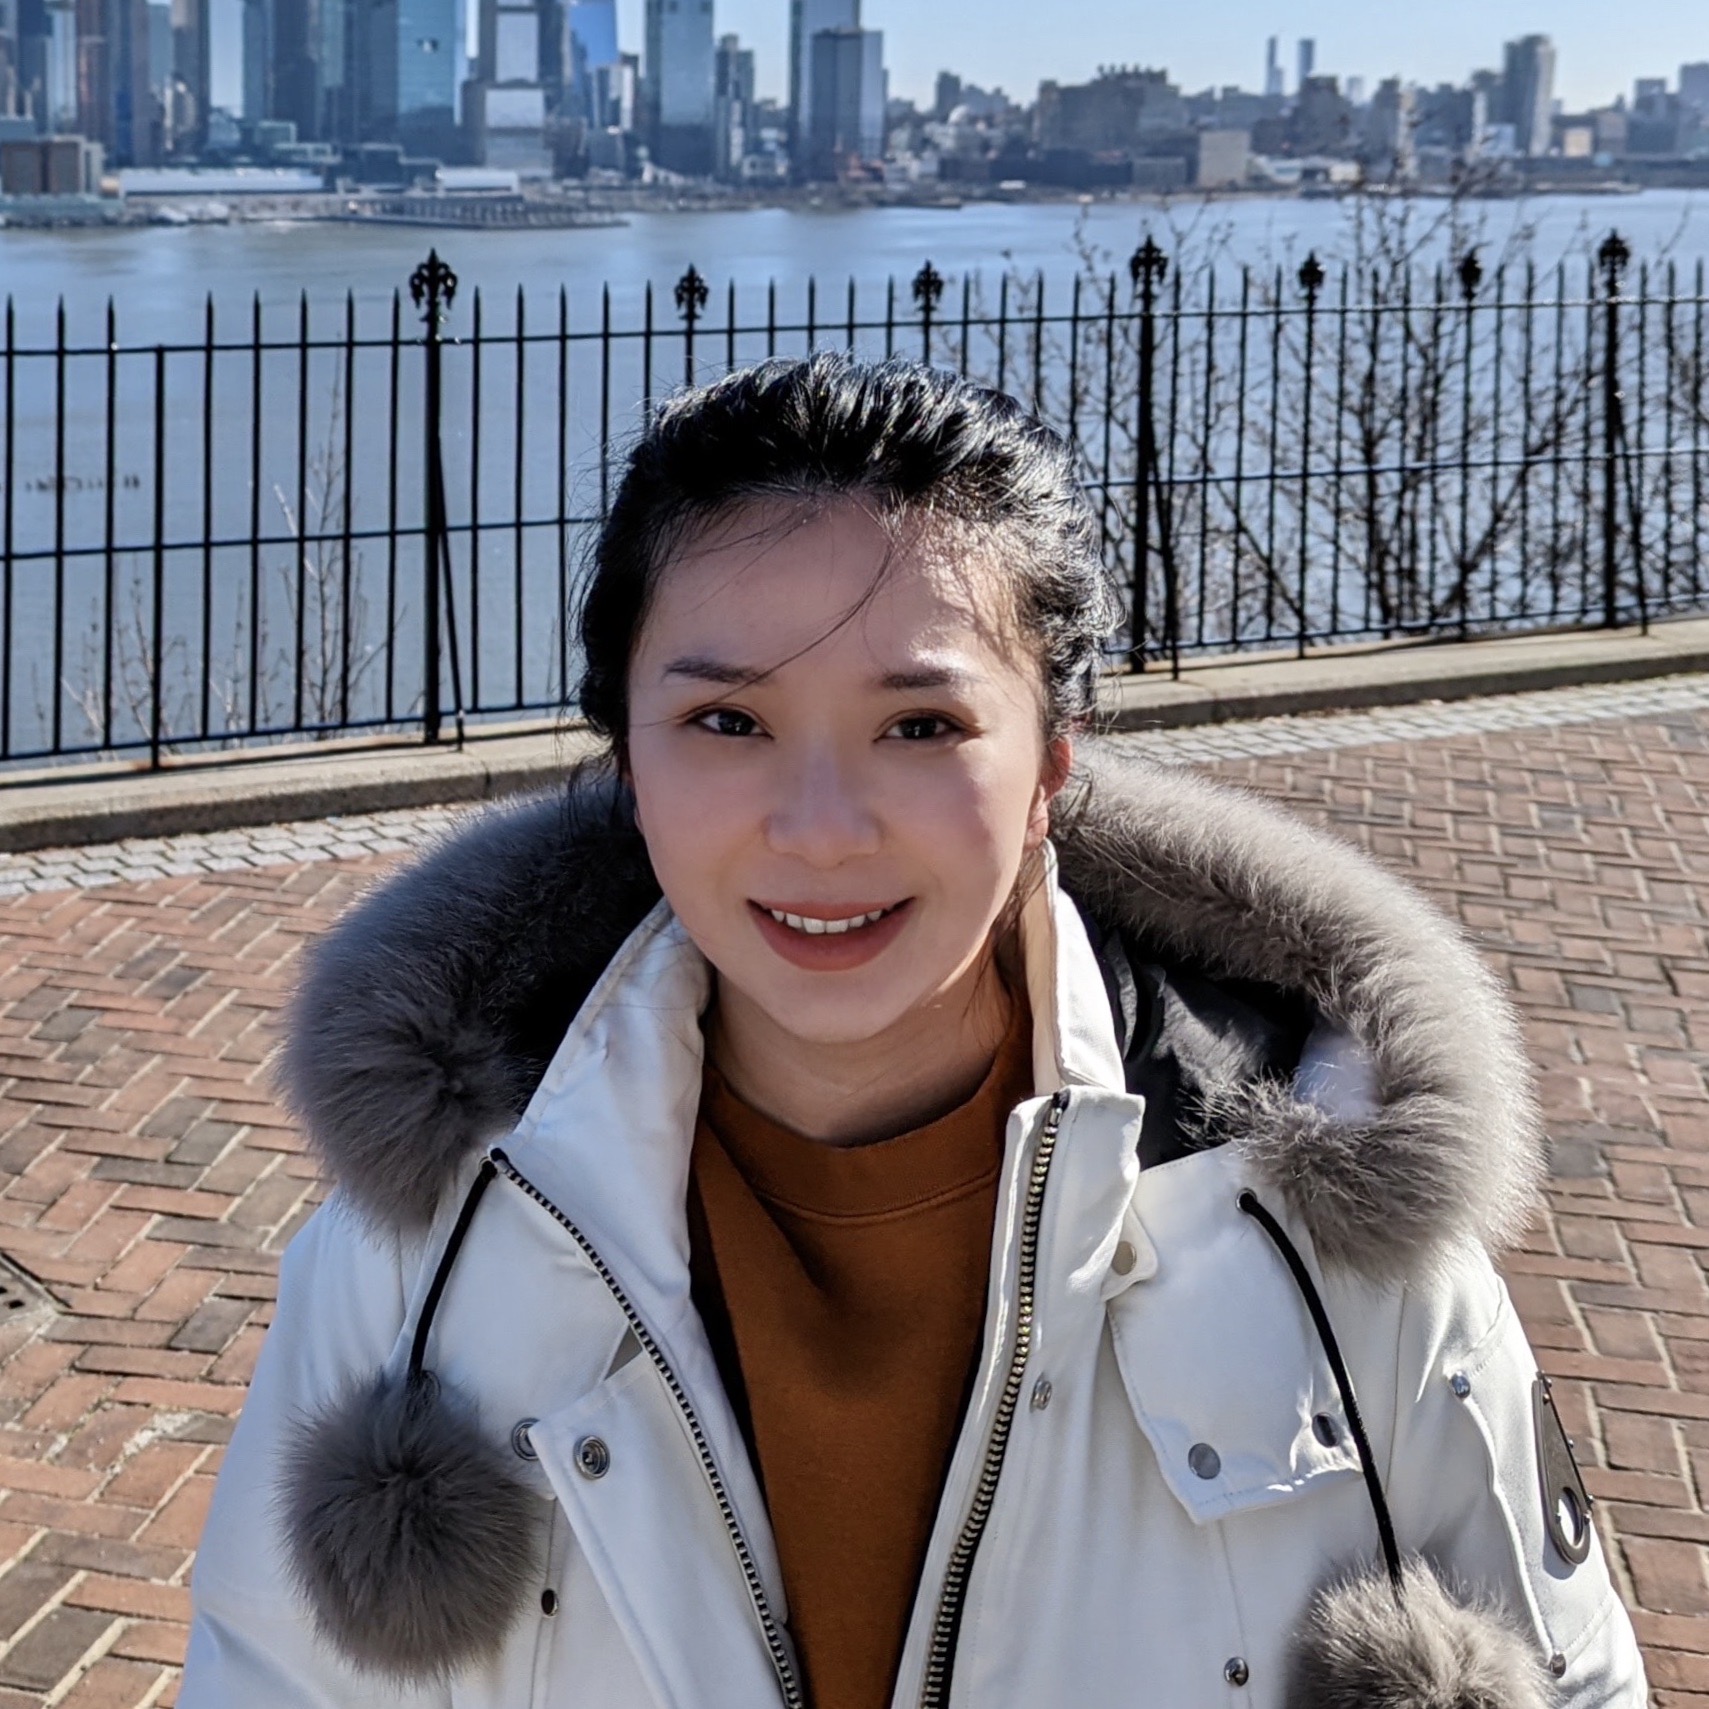 An Asian woman wearing a white hooded coat smiles in front of a city and a river skyline.